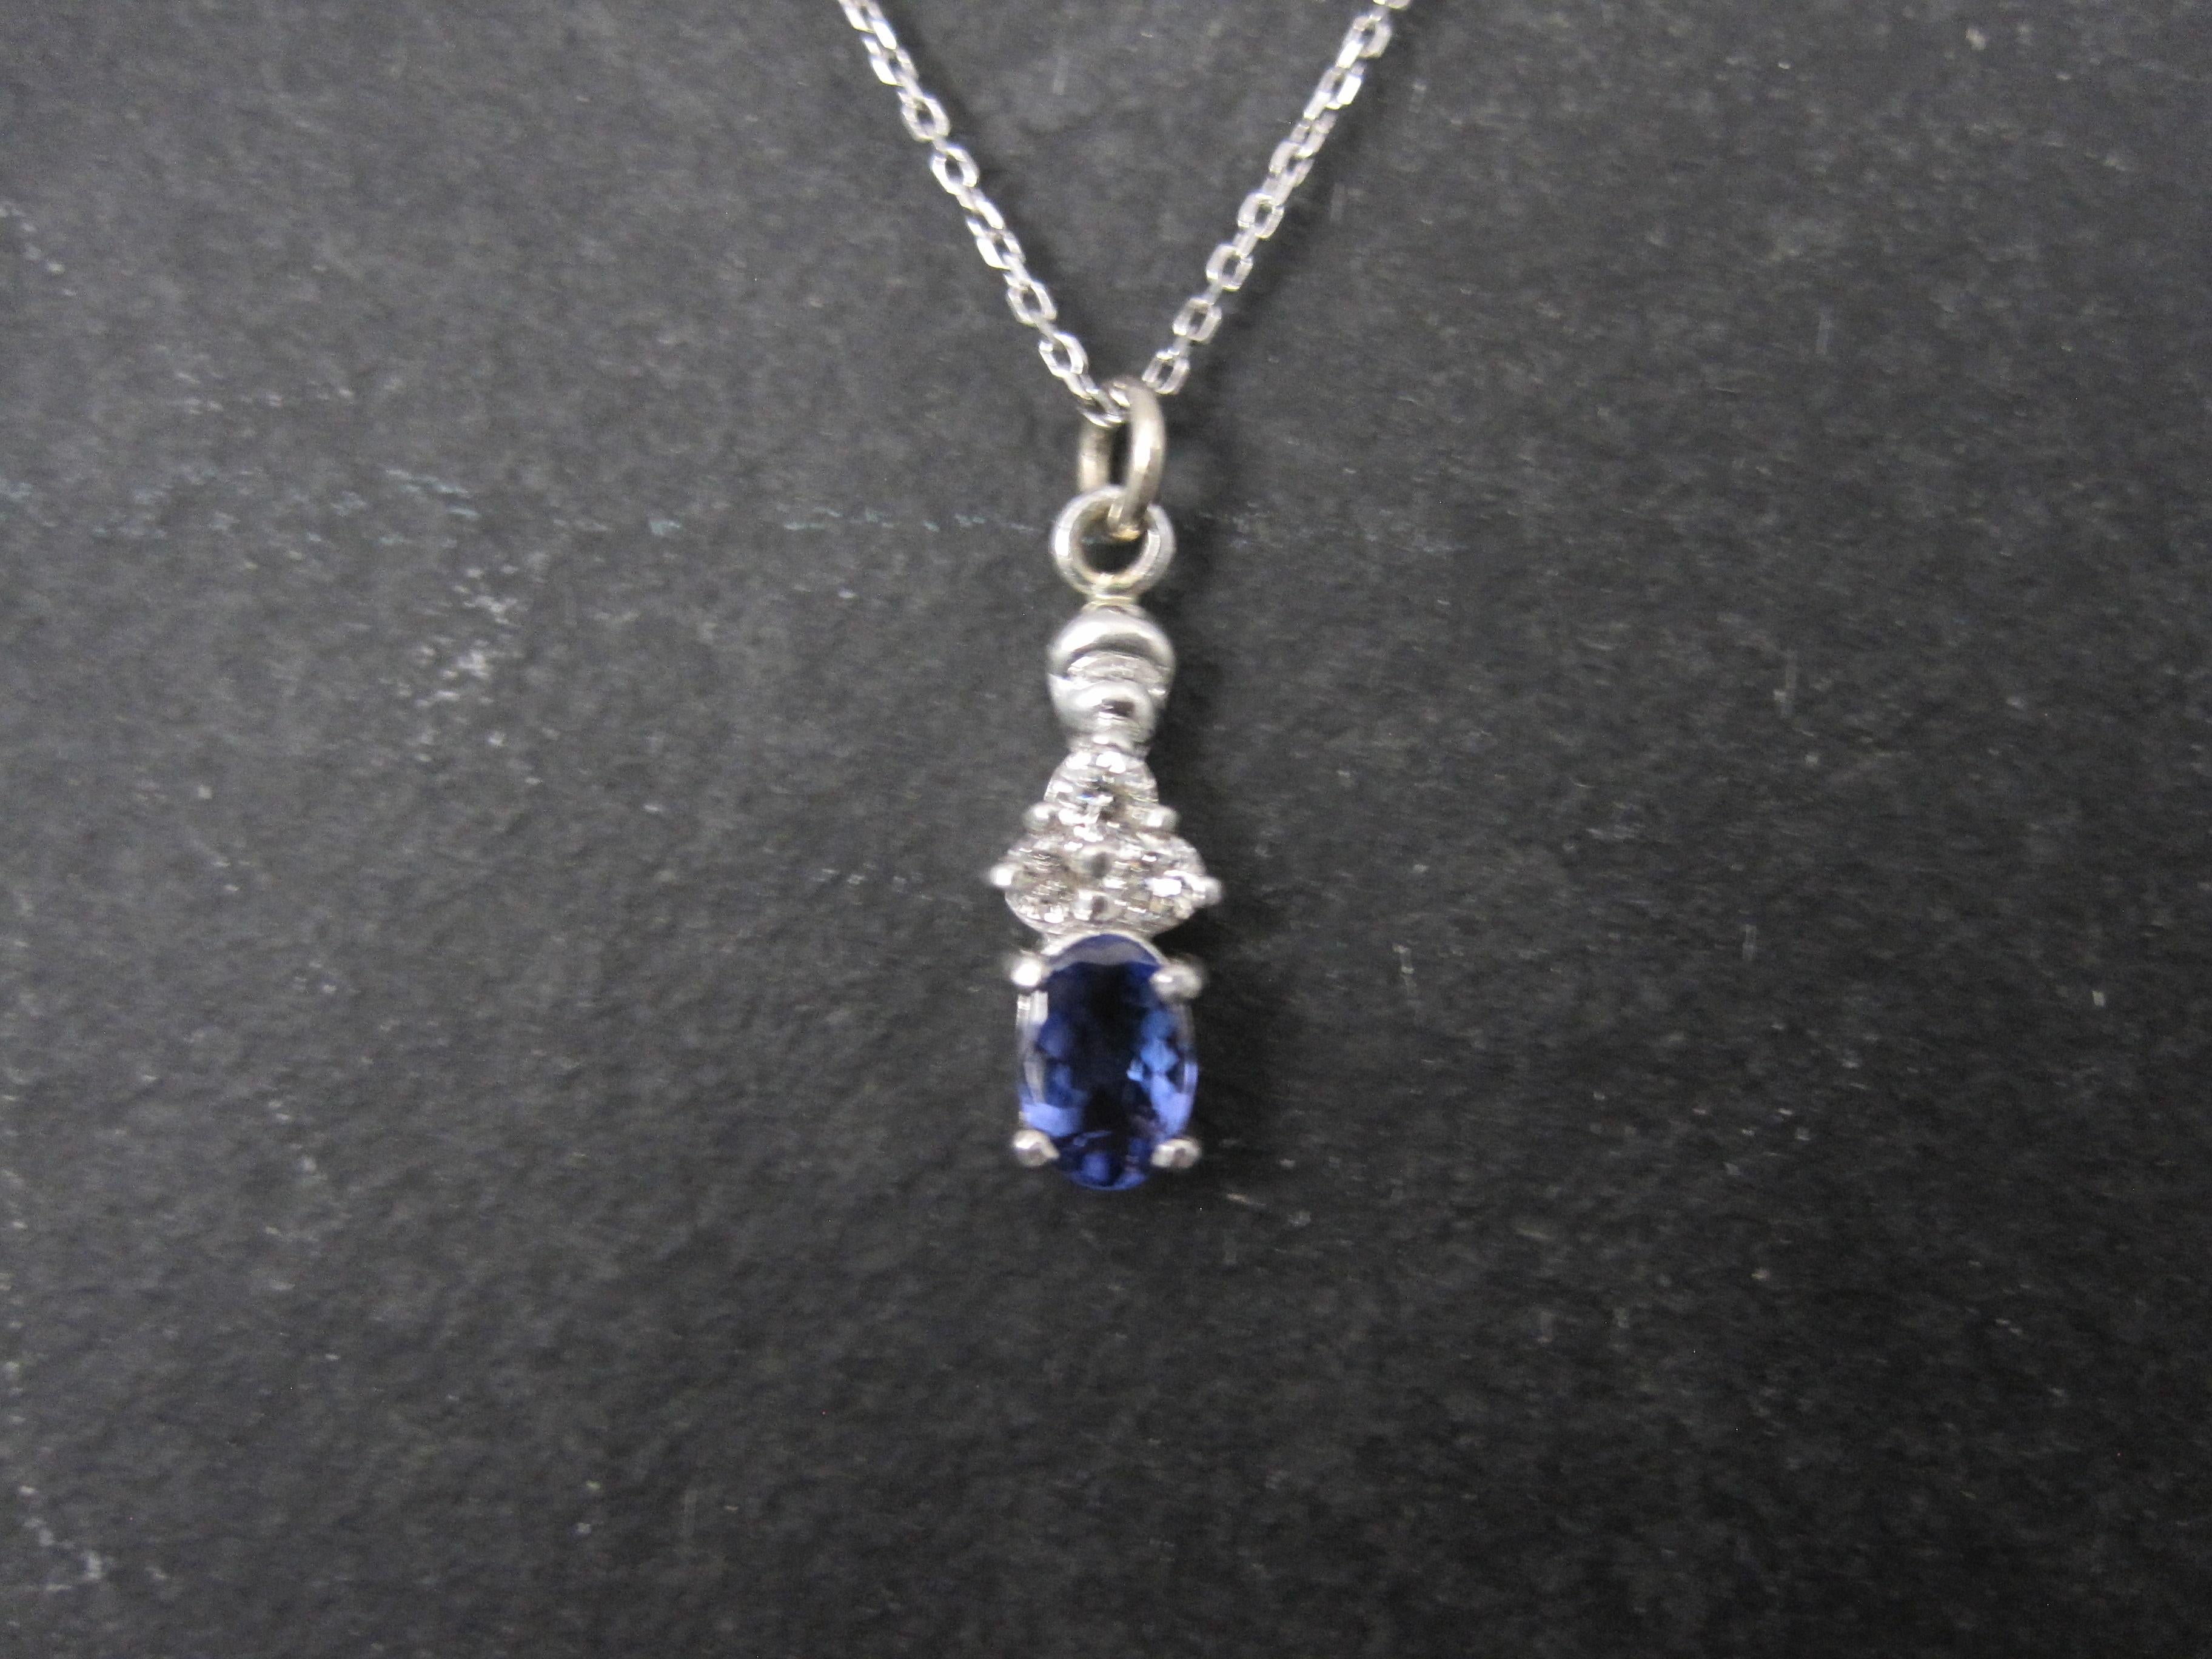 This beautiful pendant was created from a Levian 